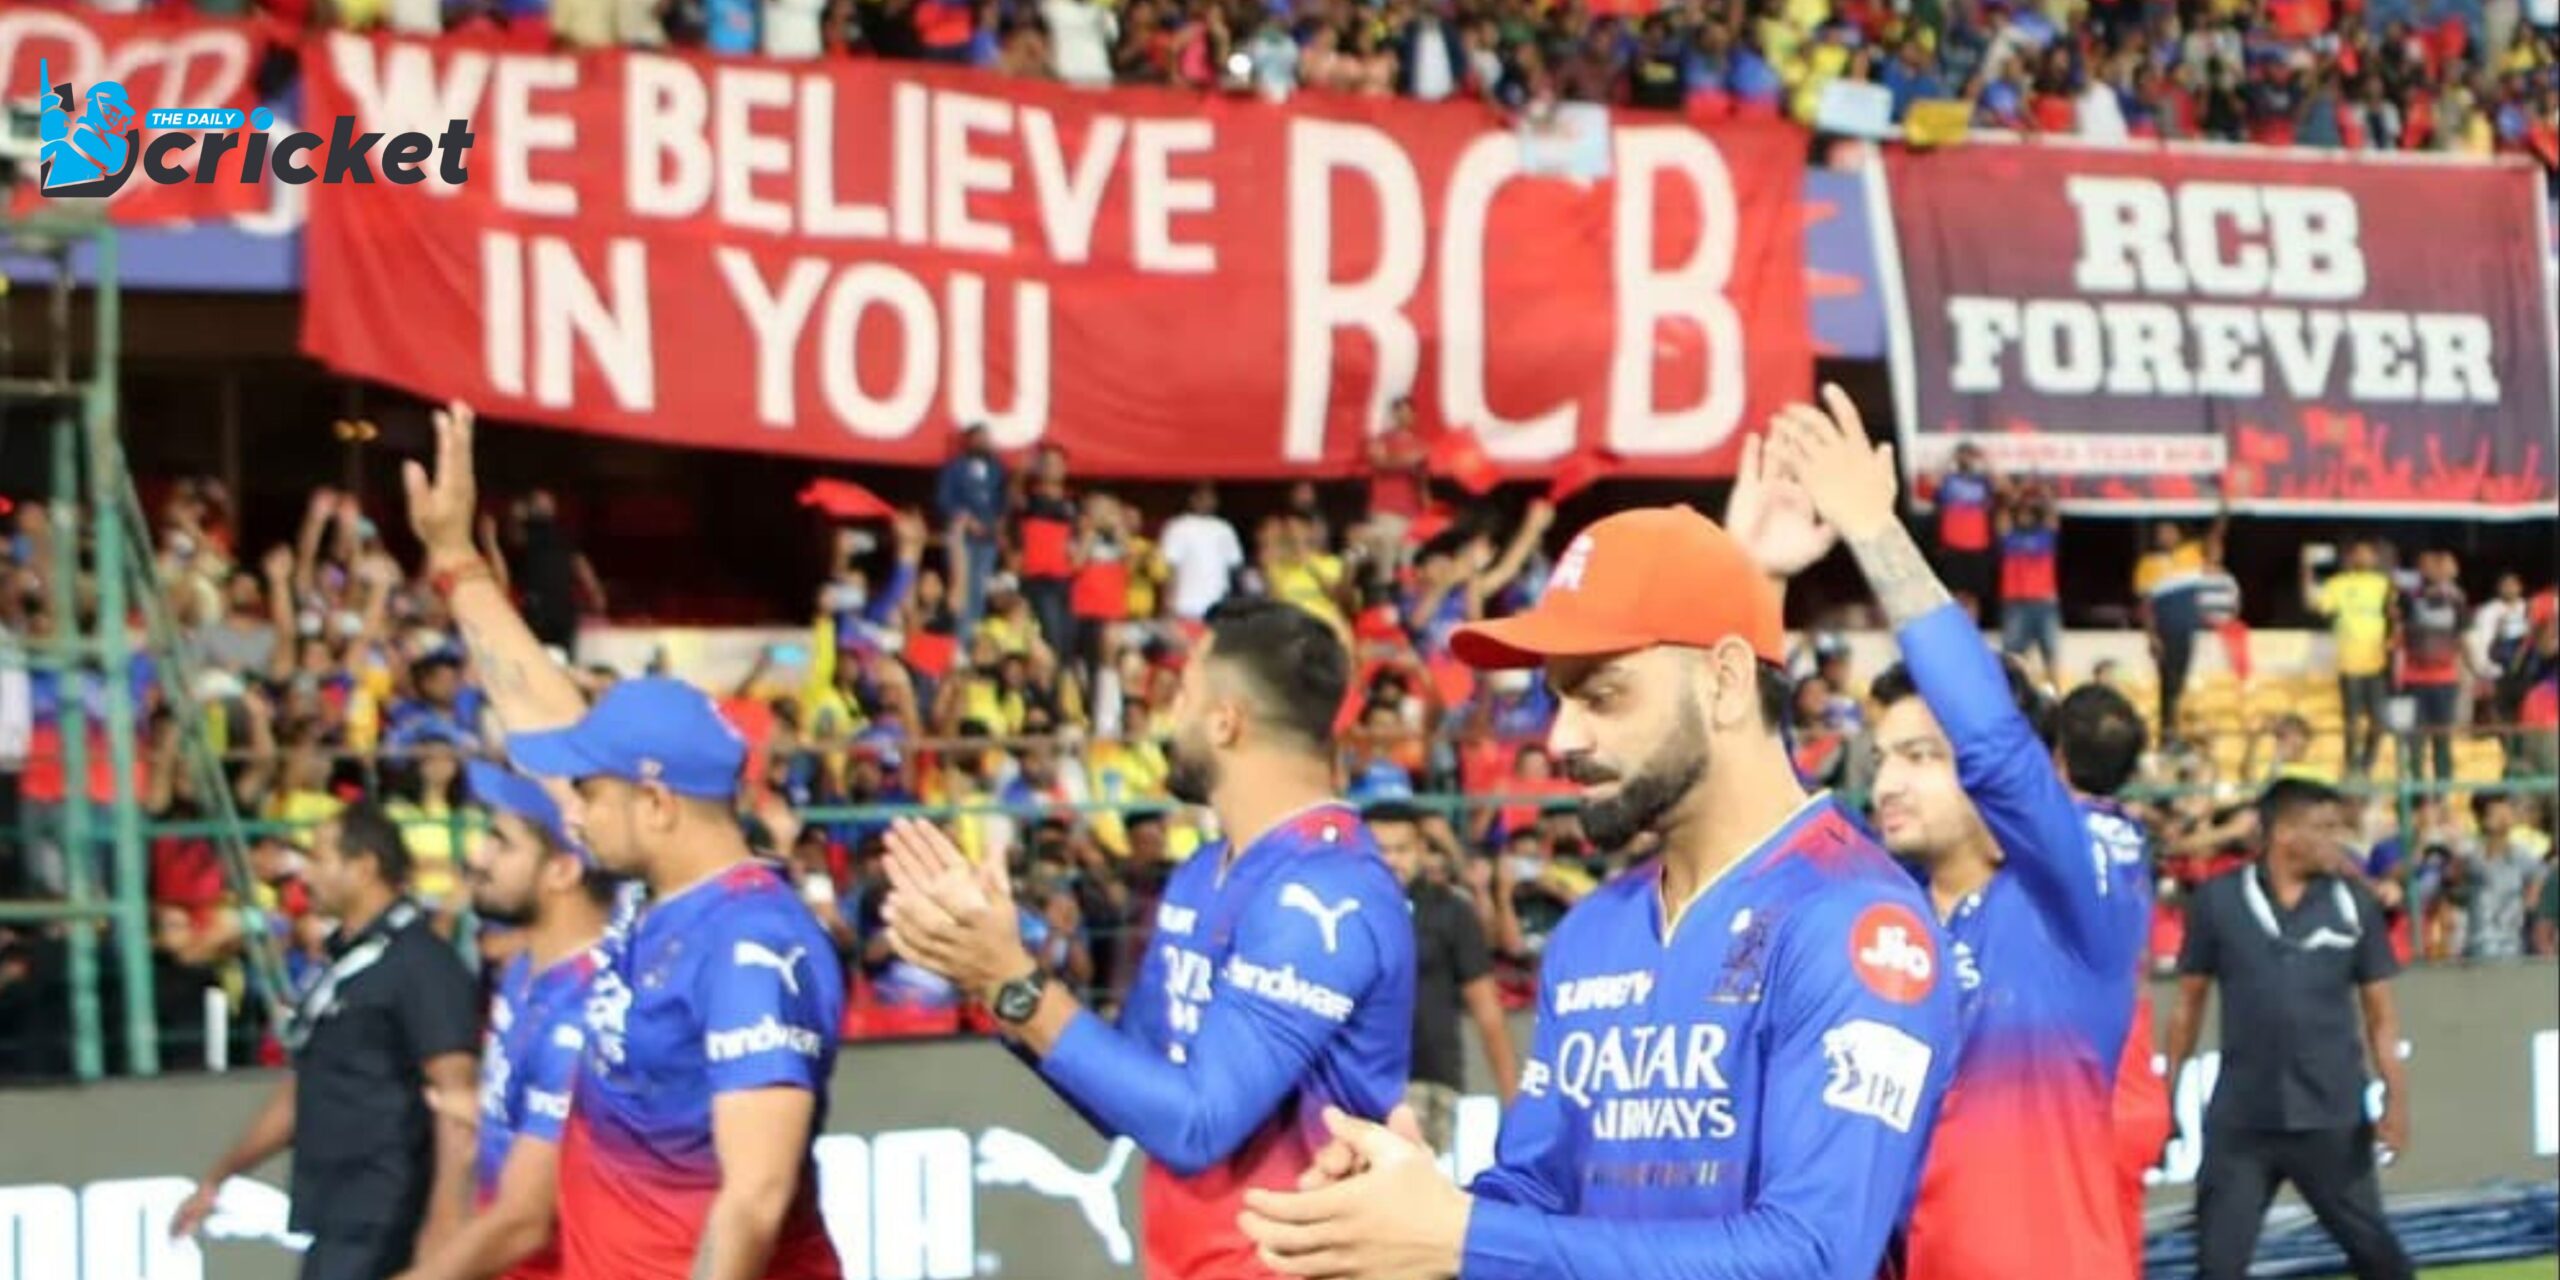 RCB IPL Playoffs Records: Highest Team Total, Most Runs, Most Wickets, and More